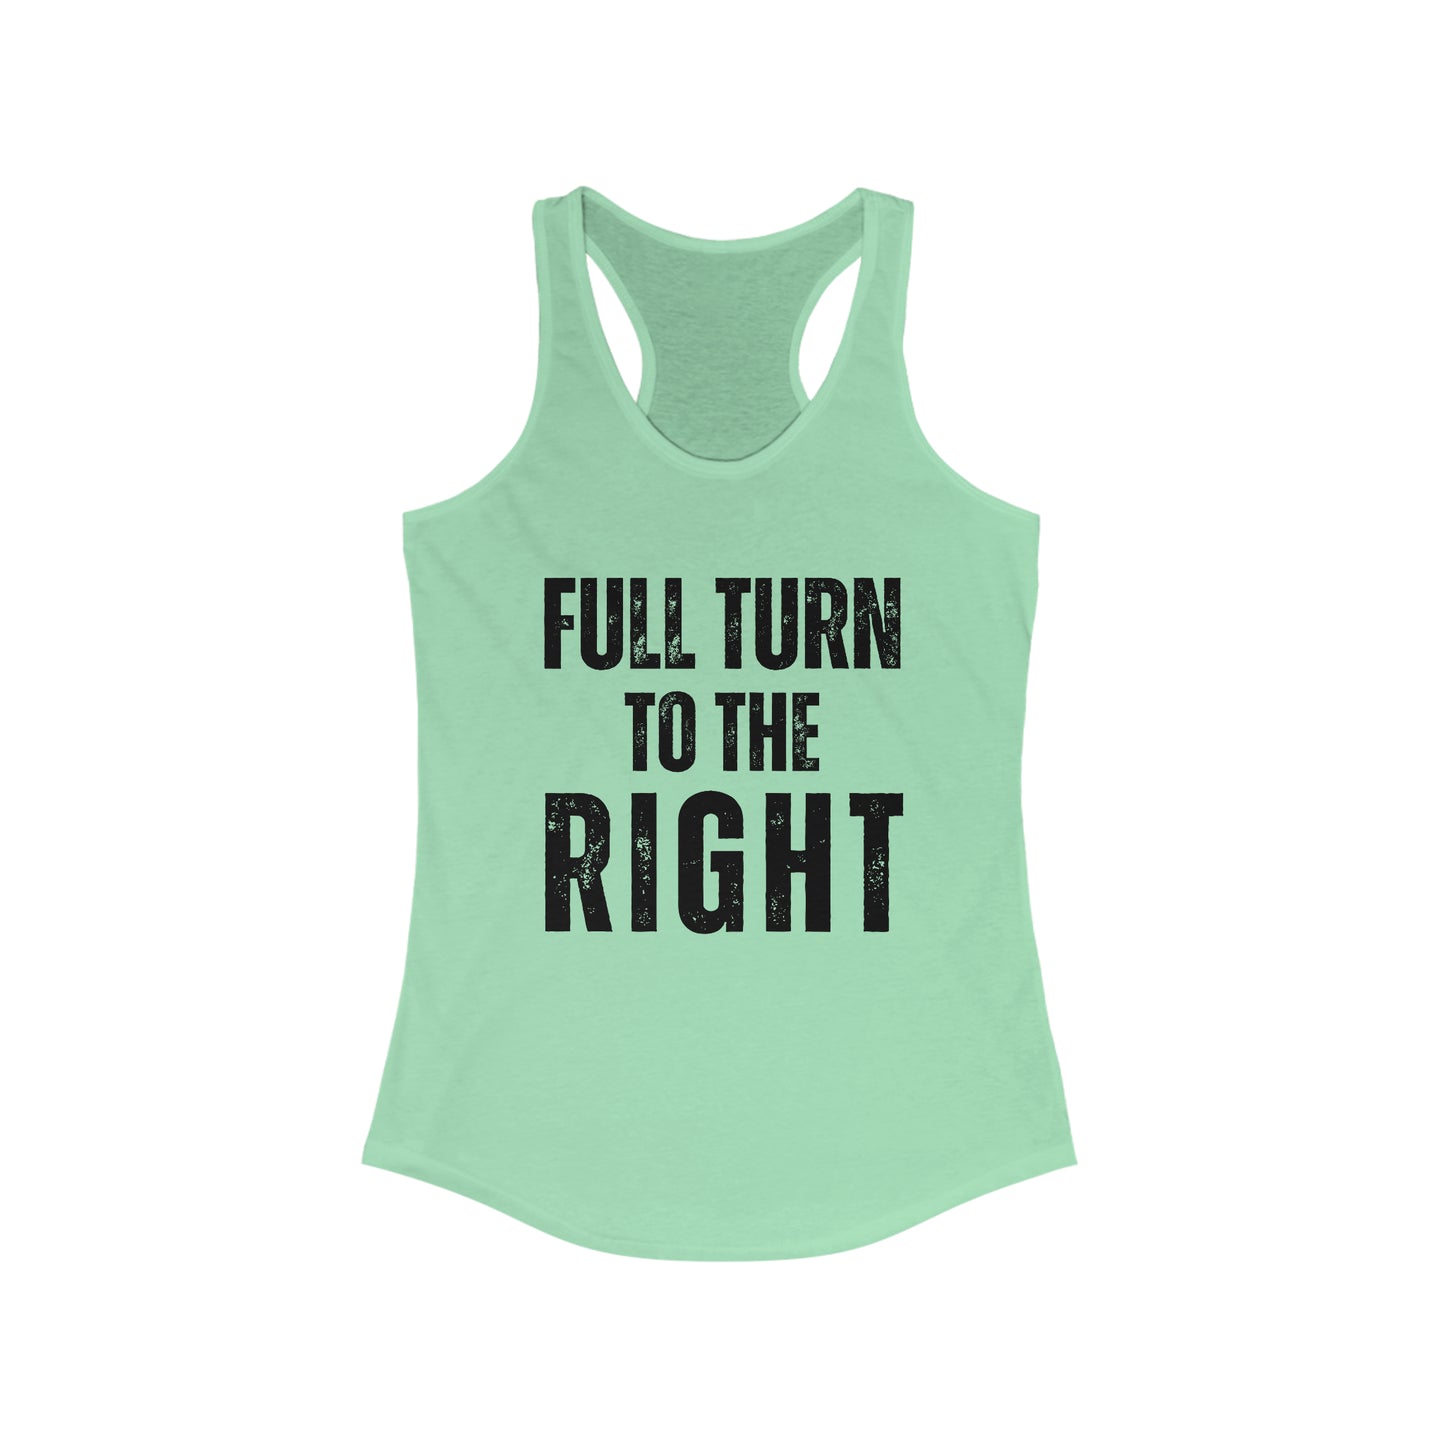 Full Turn to the Right - Spin class tank top